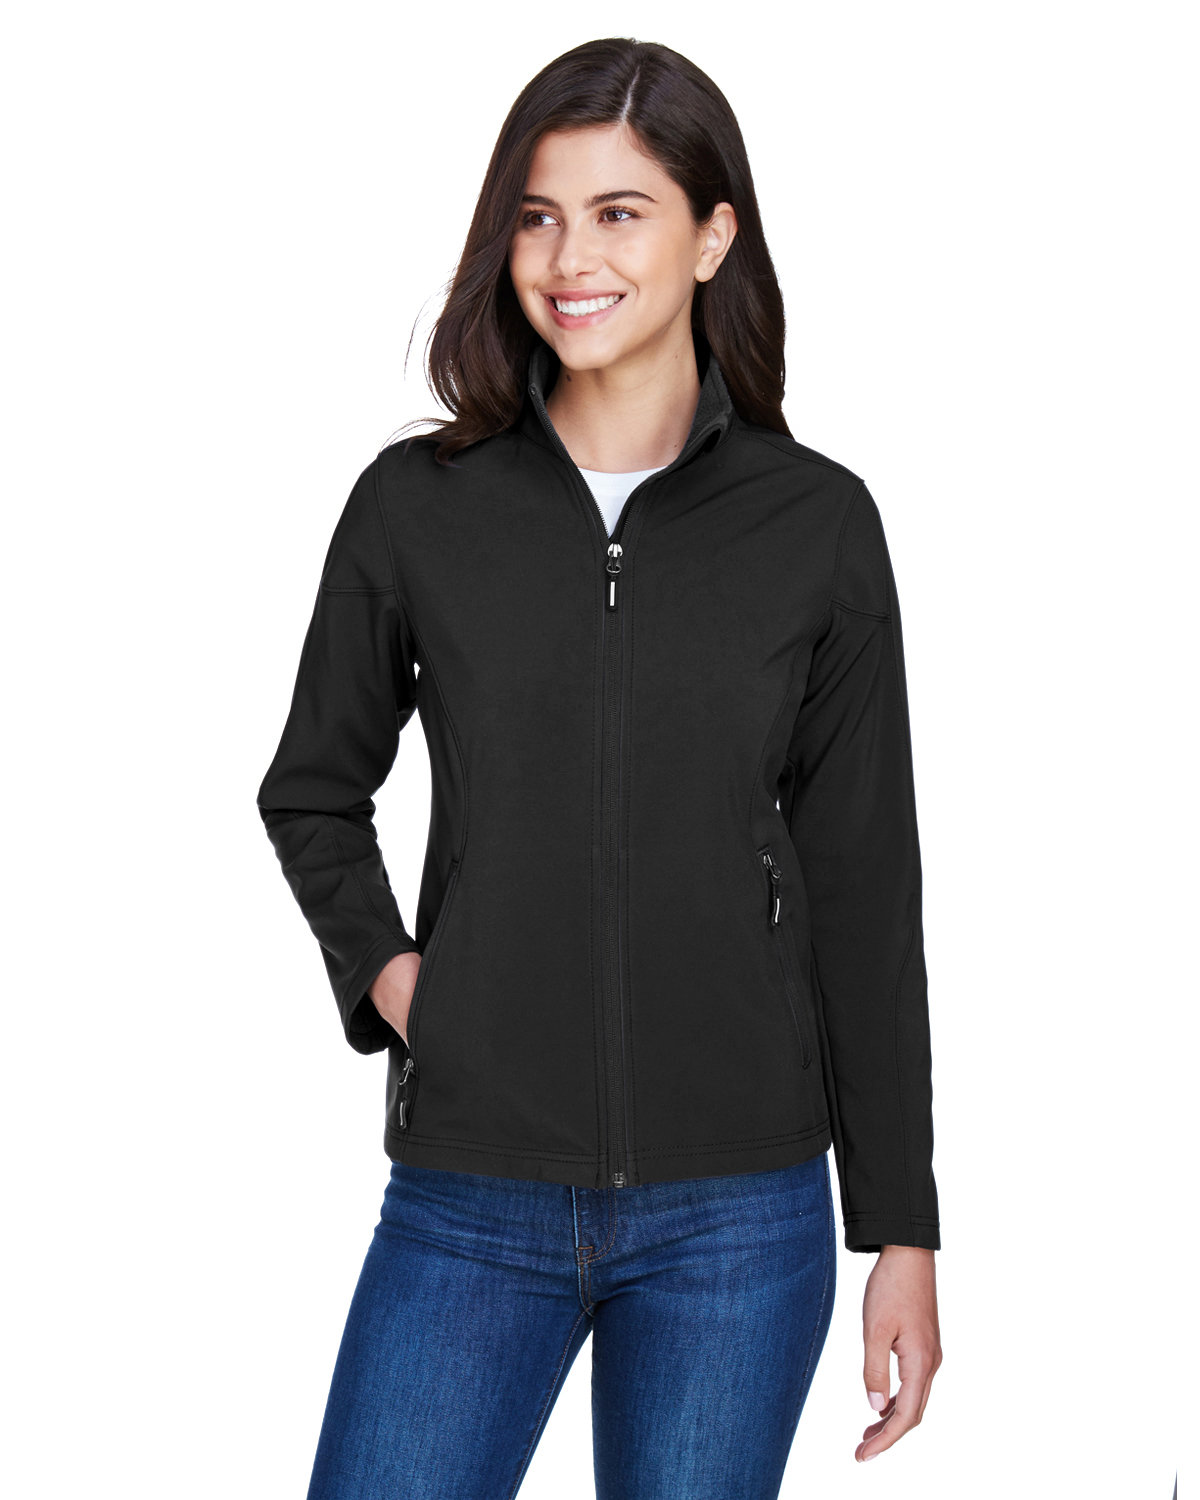 Core 365 Ladies' Cruise Two-Layer Fleece Bonded Soft Shell Jacket BLACK 